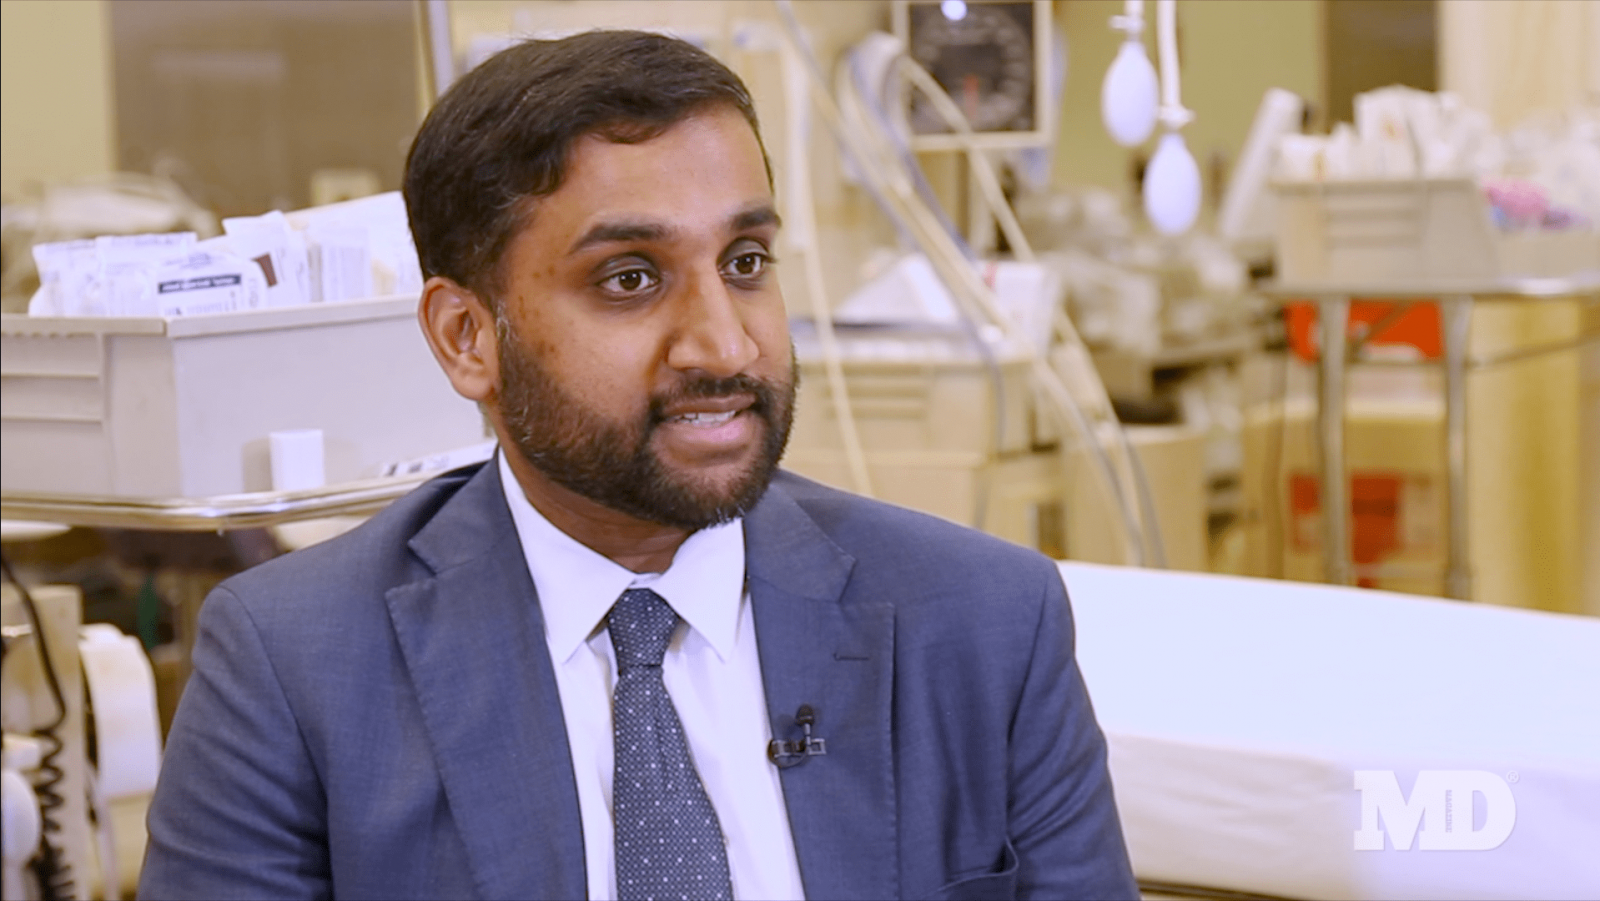 Azmat Husain, MD: The Hospital Administration's Ability to Provide Structure